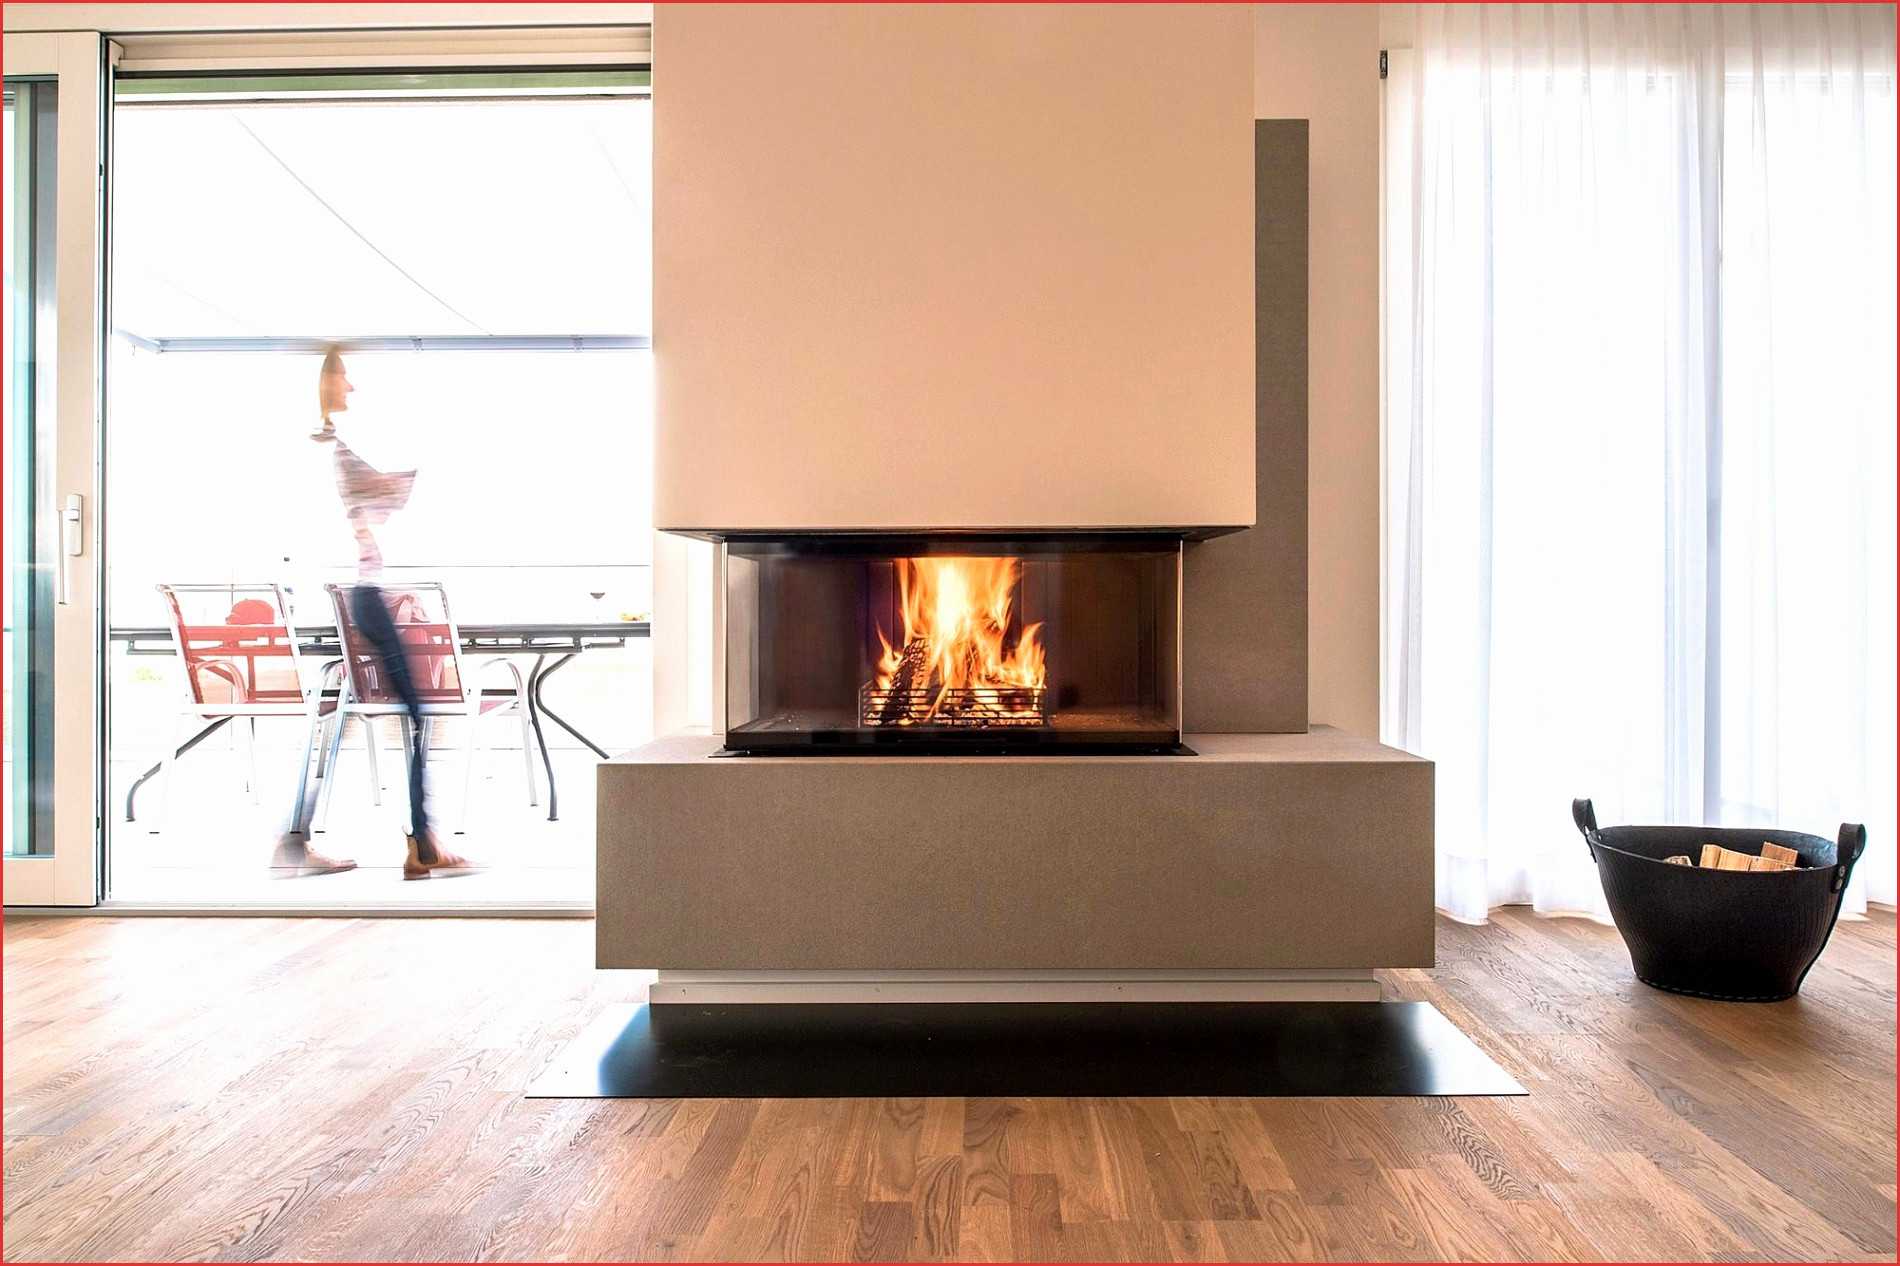 Pictures Of Fireplace Hearths Beautiful Moderner Holzofen Luxus Kamin In Der Wand Frisch Moderne